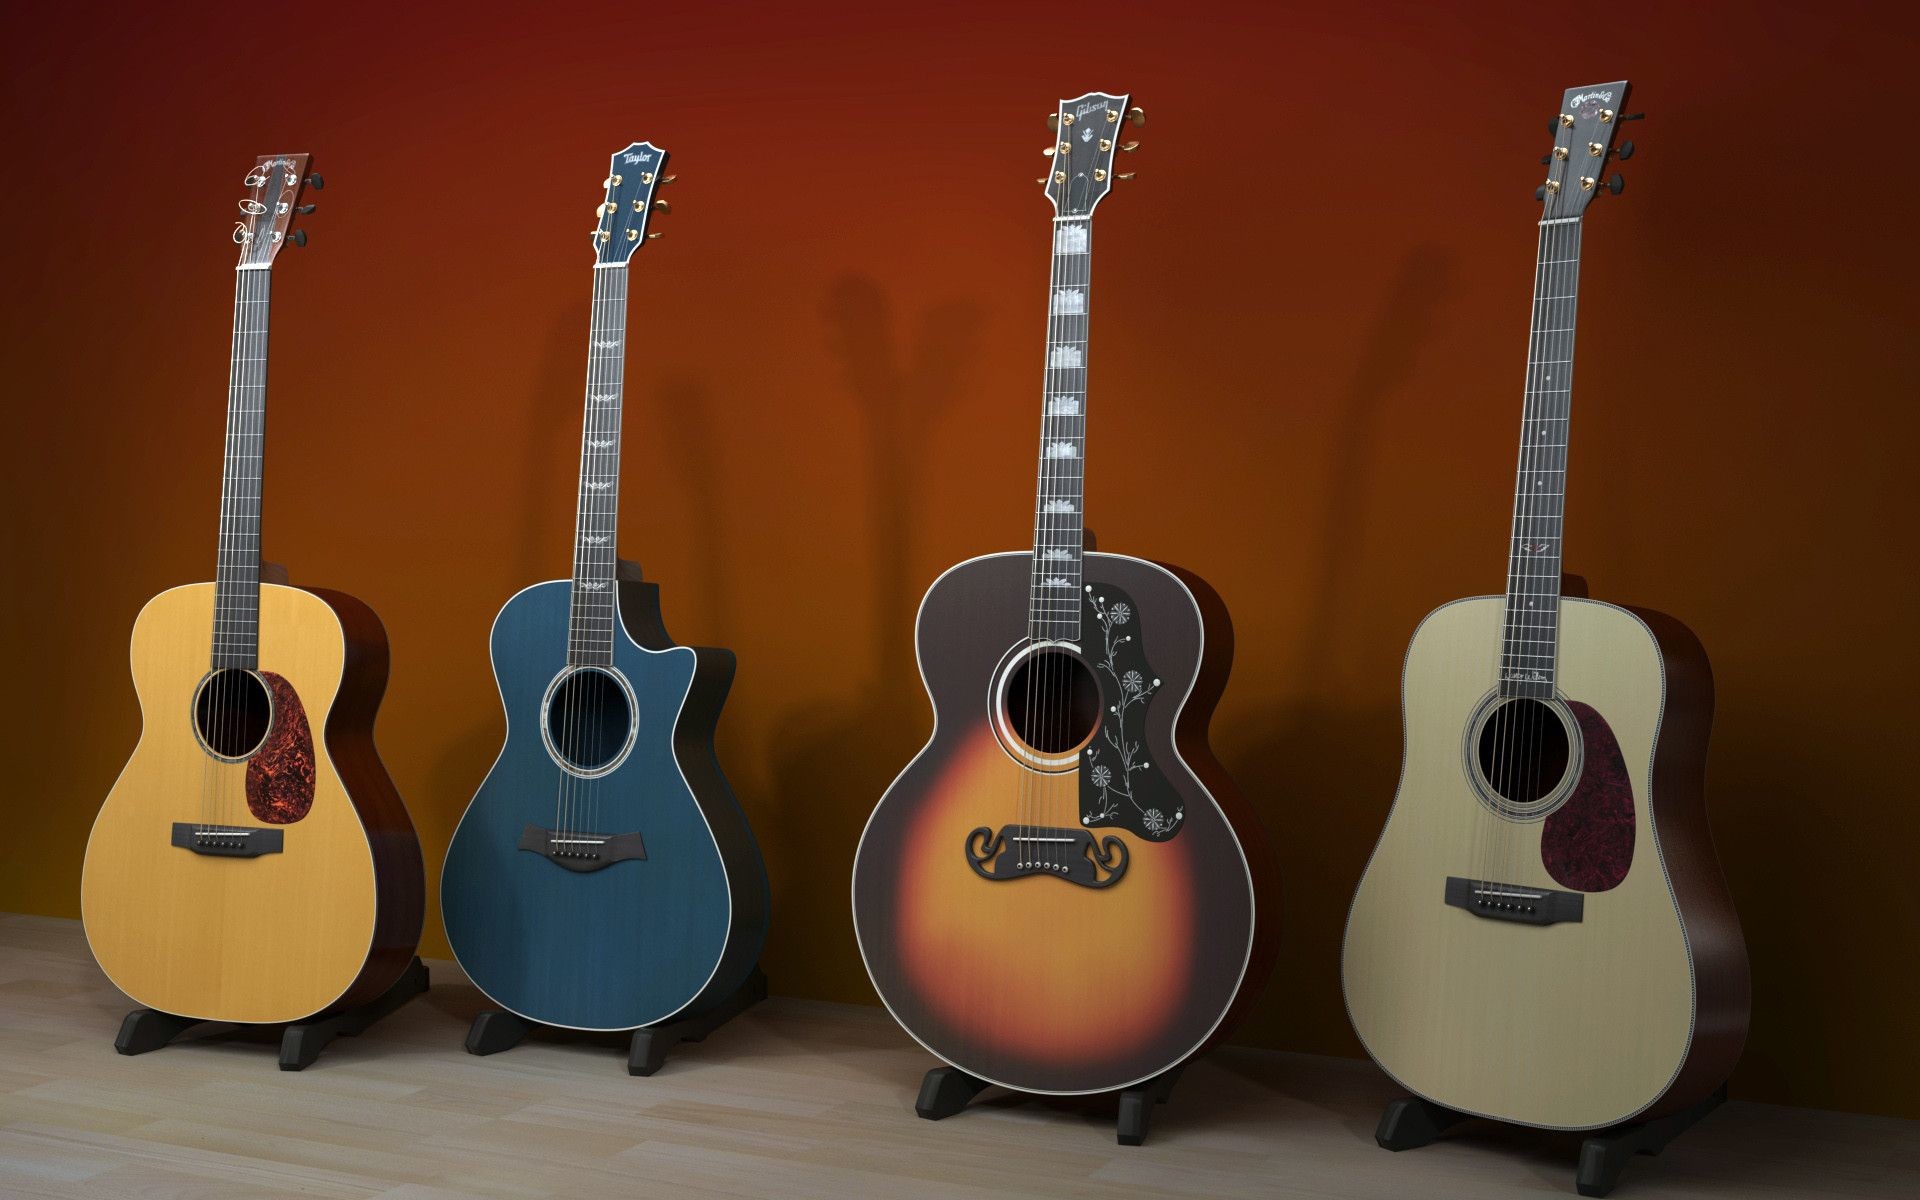 Collection Of Cool Guitar Backgrounds On Hdwallpapers 1920 1200 Cool Guitar Backgrounds 50 Wallpapers 1920x1200